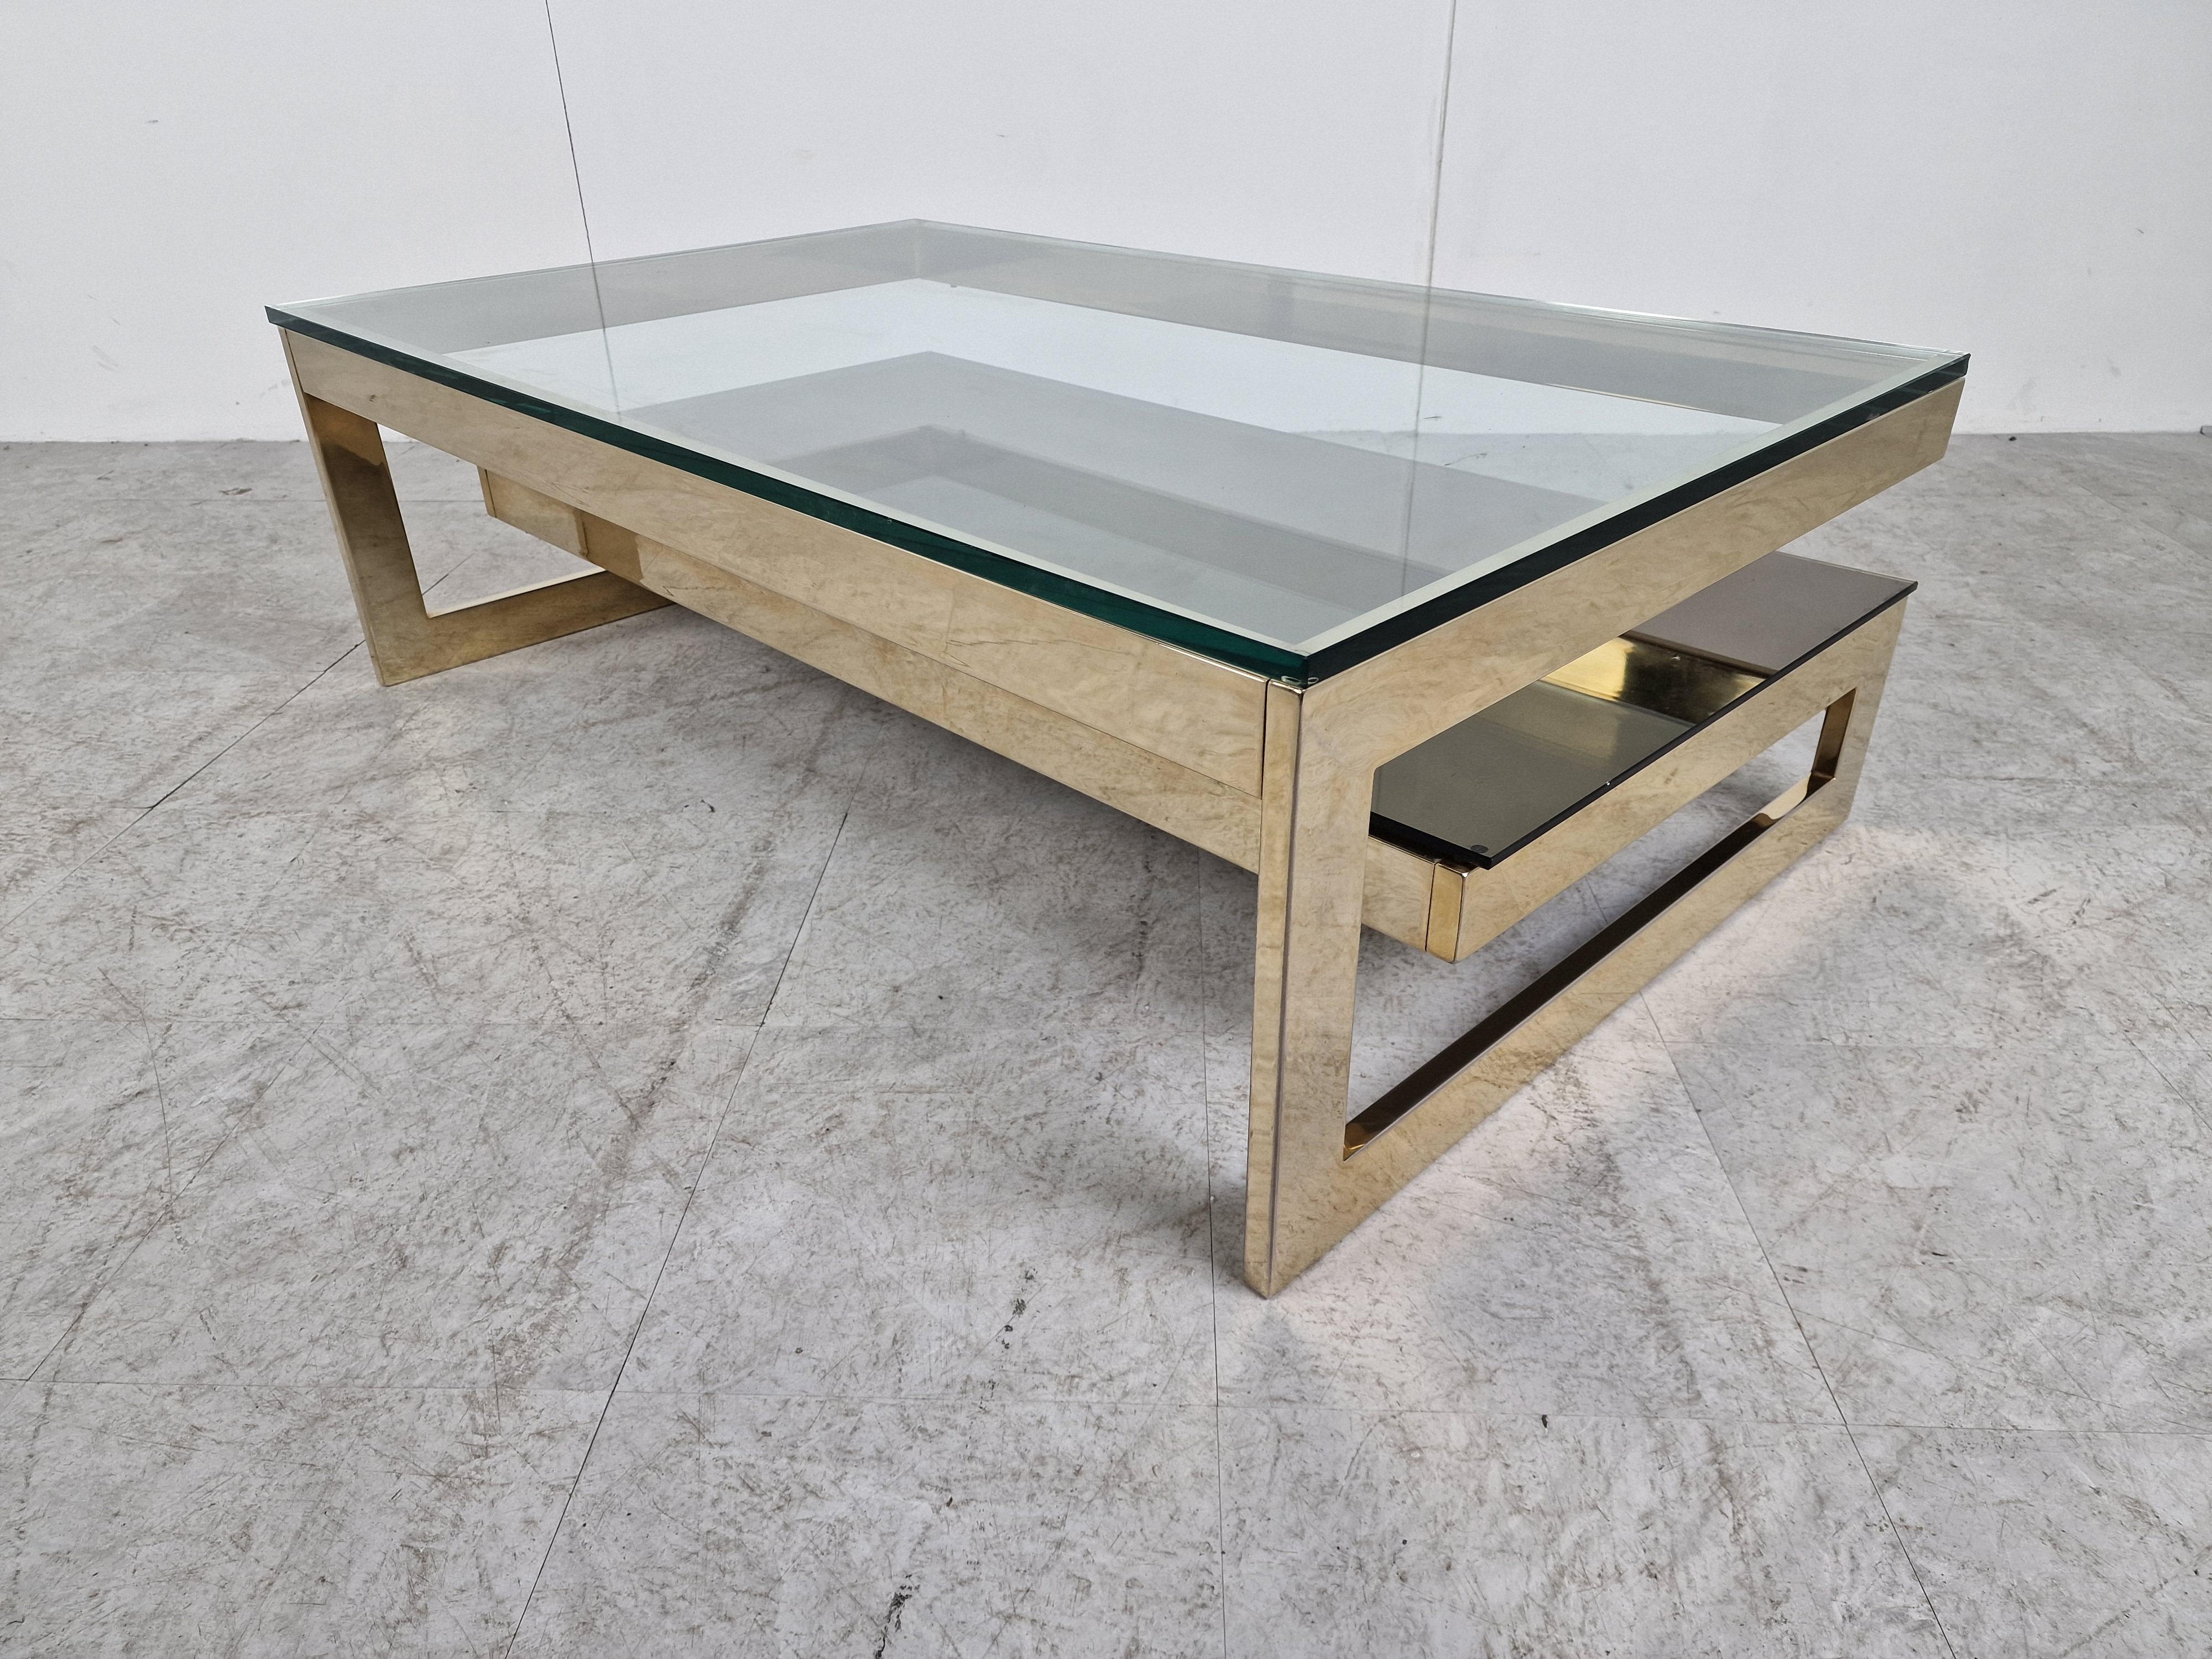 Quality 23kt gold layered and thick clear glass two tier coffee table manufactured by Belgochrom.

This table is a popular model and is referred to as the 'G' model

Belgochrom produced quality furniture pieces with a luxurious appeal.

Good